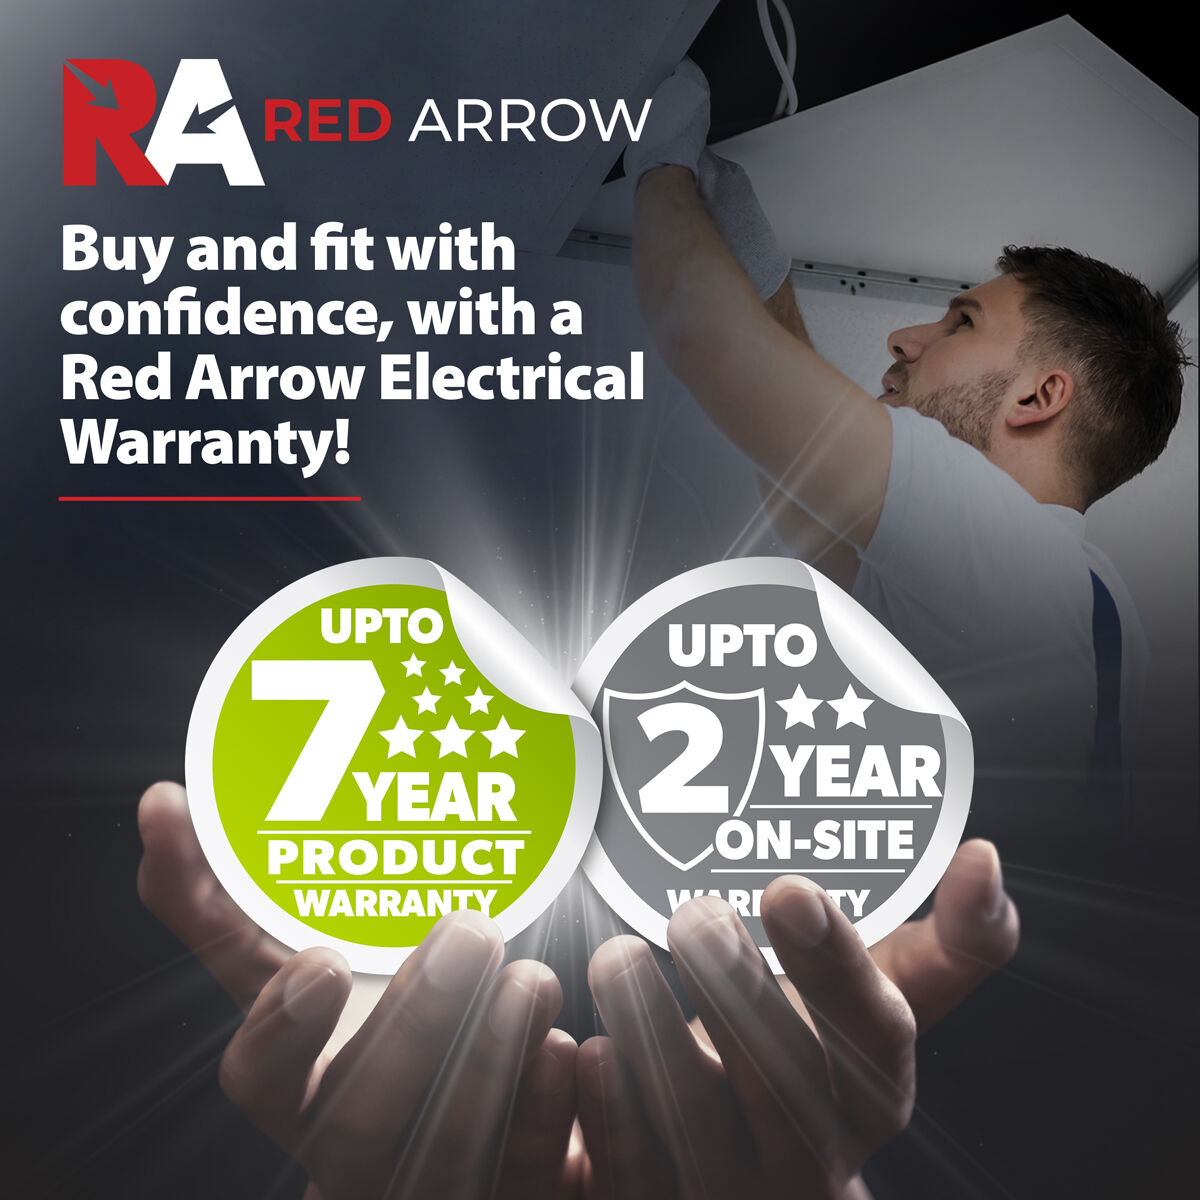 With up to 7️⃣ year product warranty and 2️⃣ year on-site warranty, you can buy and fit Red Arrow products with confidence.

Browse our range of products covered by these exceptional warranty options here 👉 bit.ly/3ZWTDBg 

#RedArrow #Warranty #Guarantee #QualityProducts